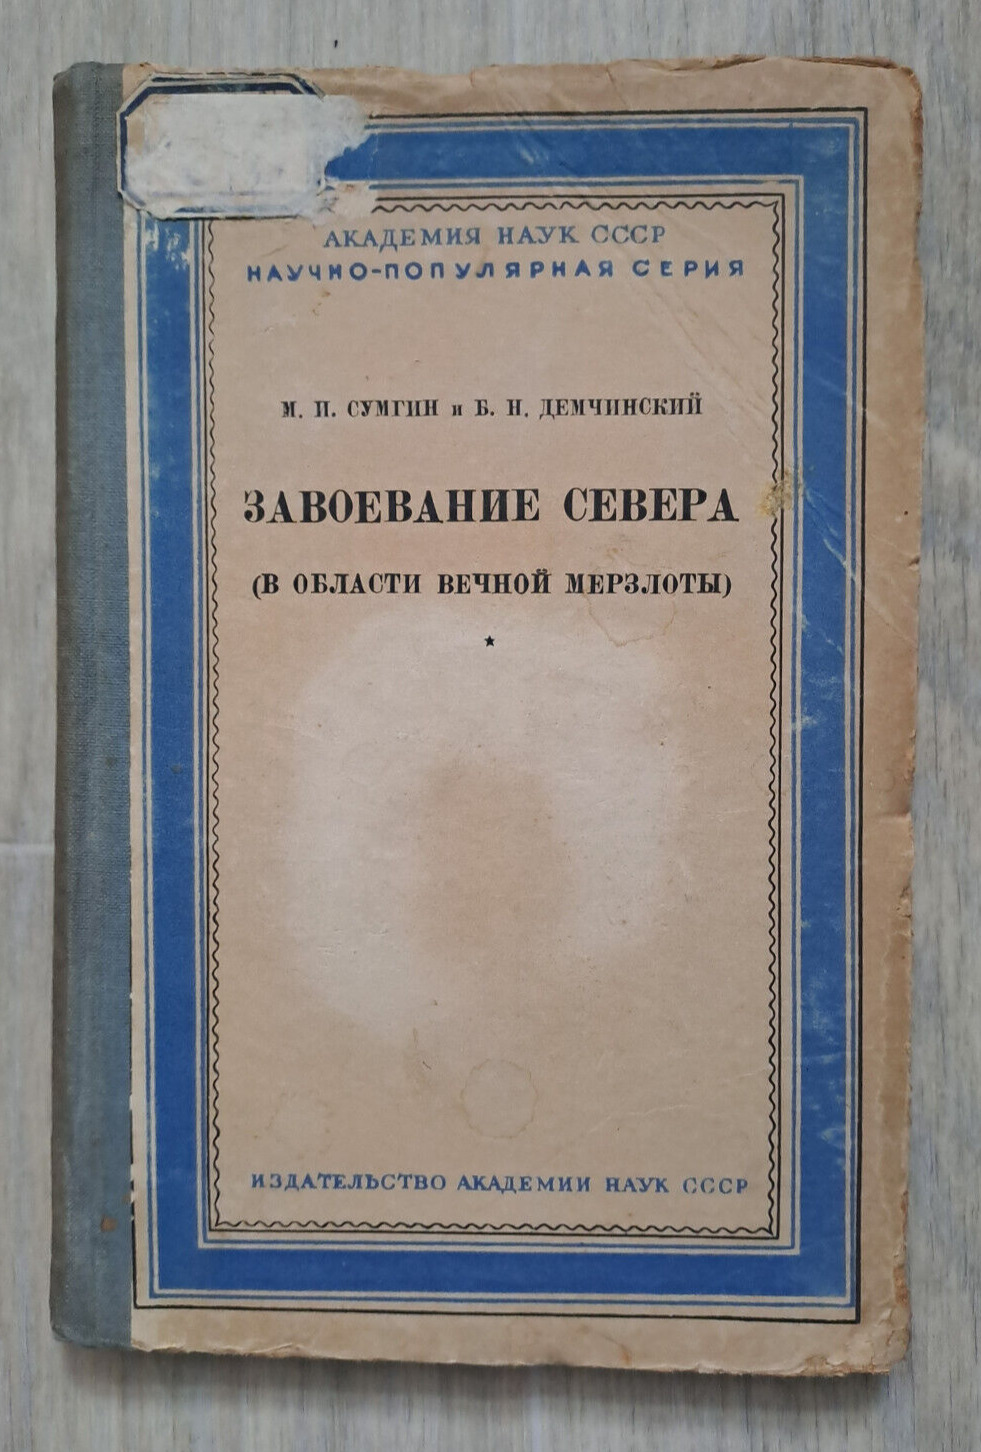 1938 Conquest of North In permafrost areaYakutia Kamchatka 10,000 Russian book